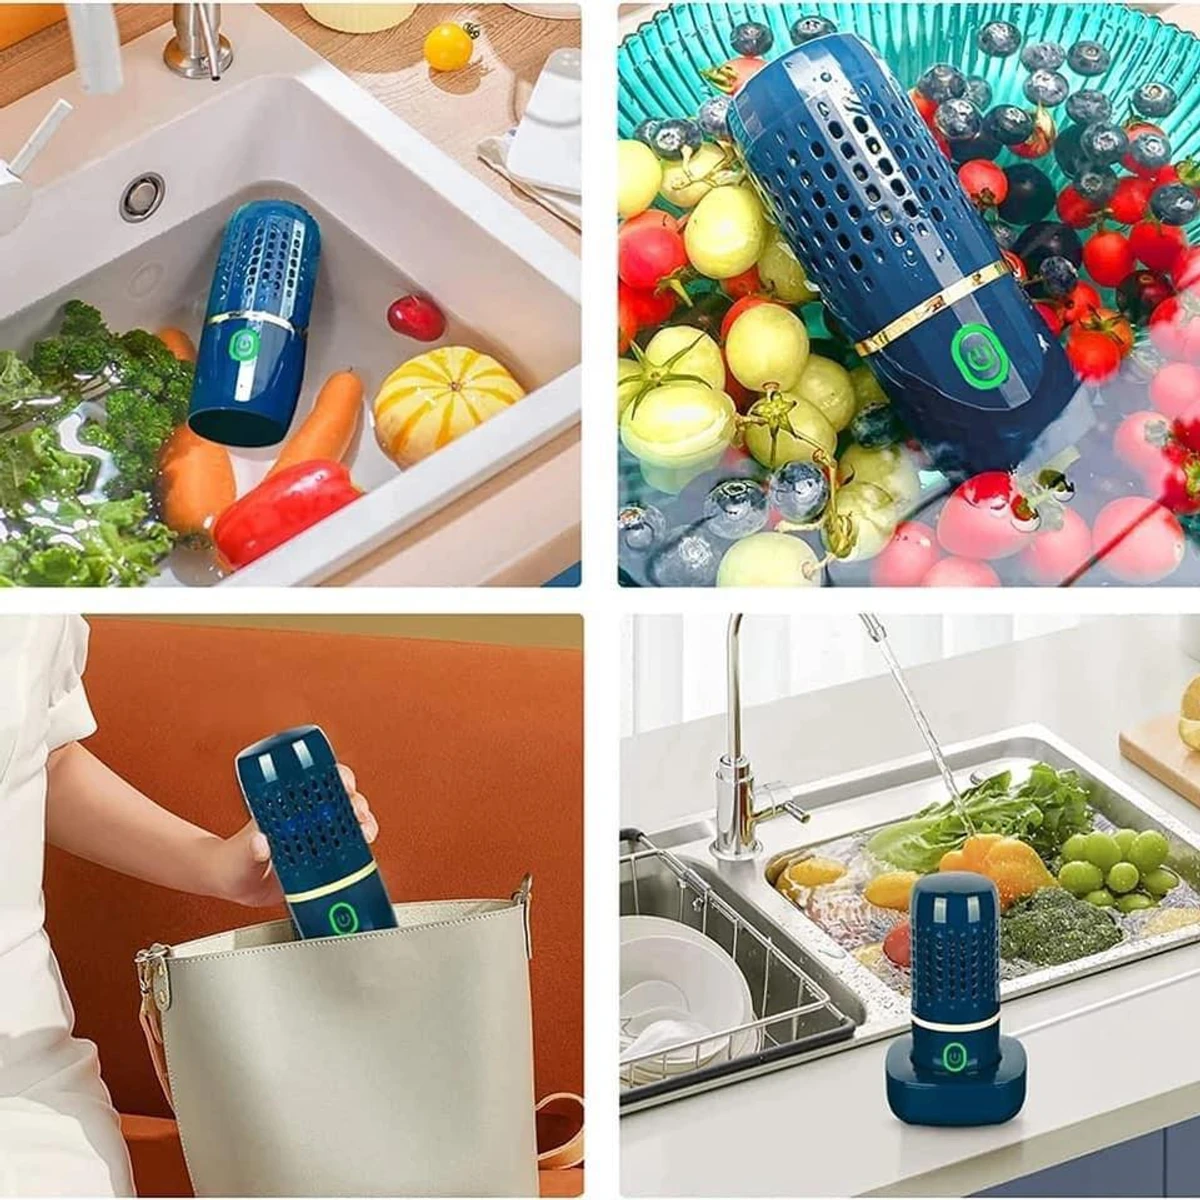 Capsule vegetable and fruits purifier machine